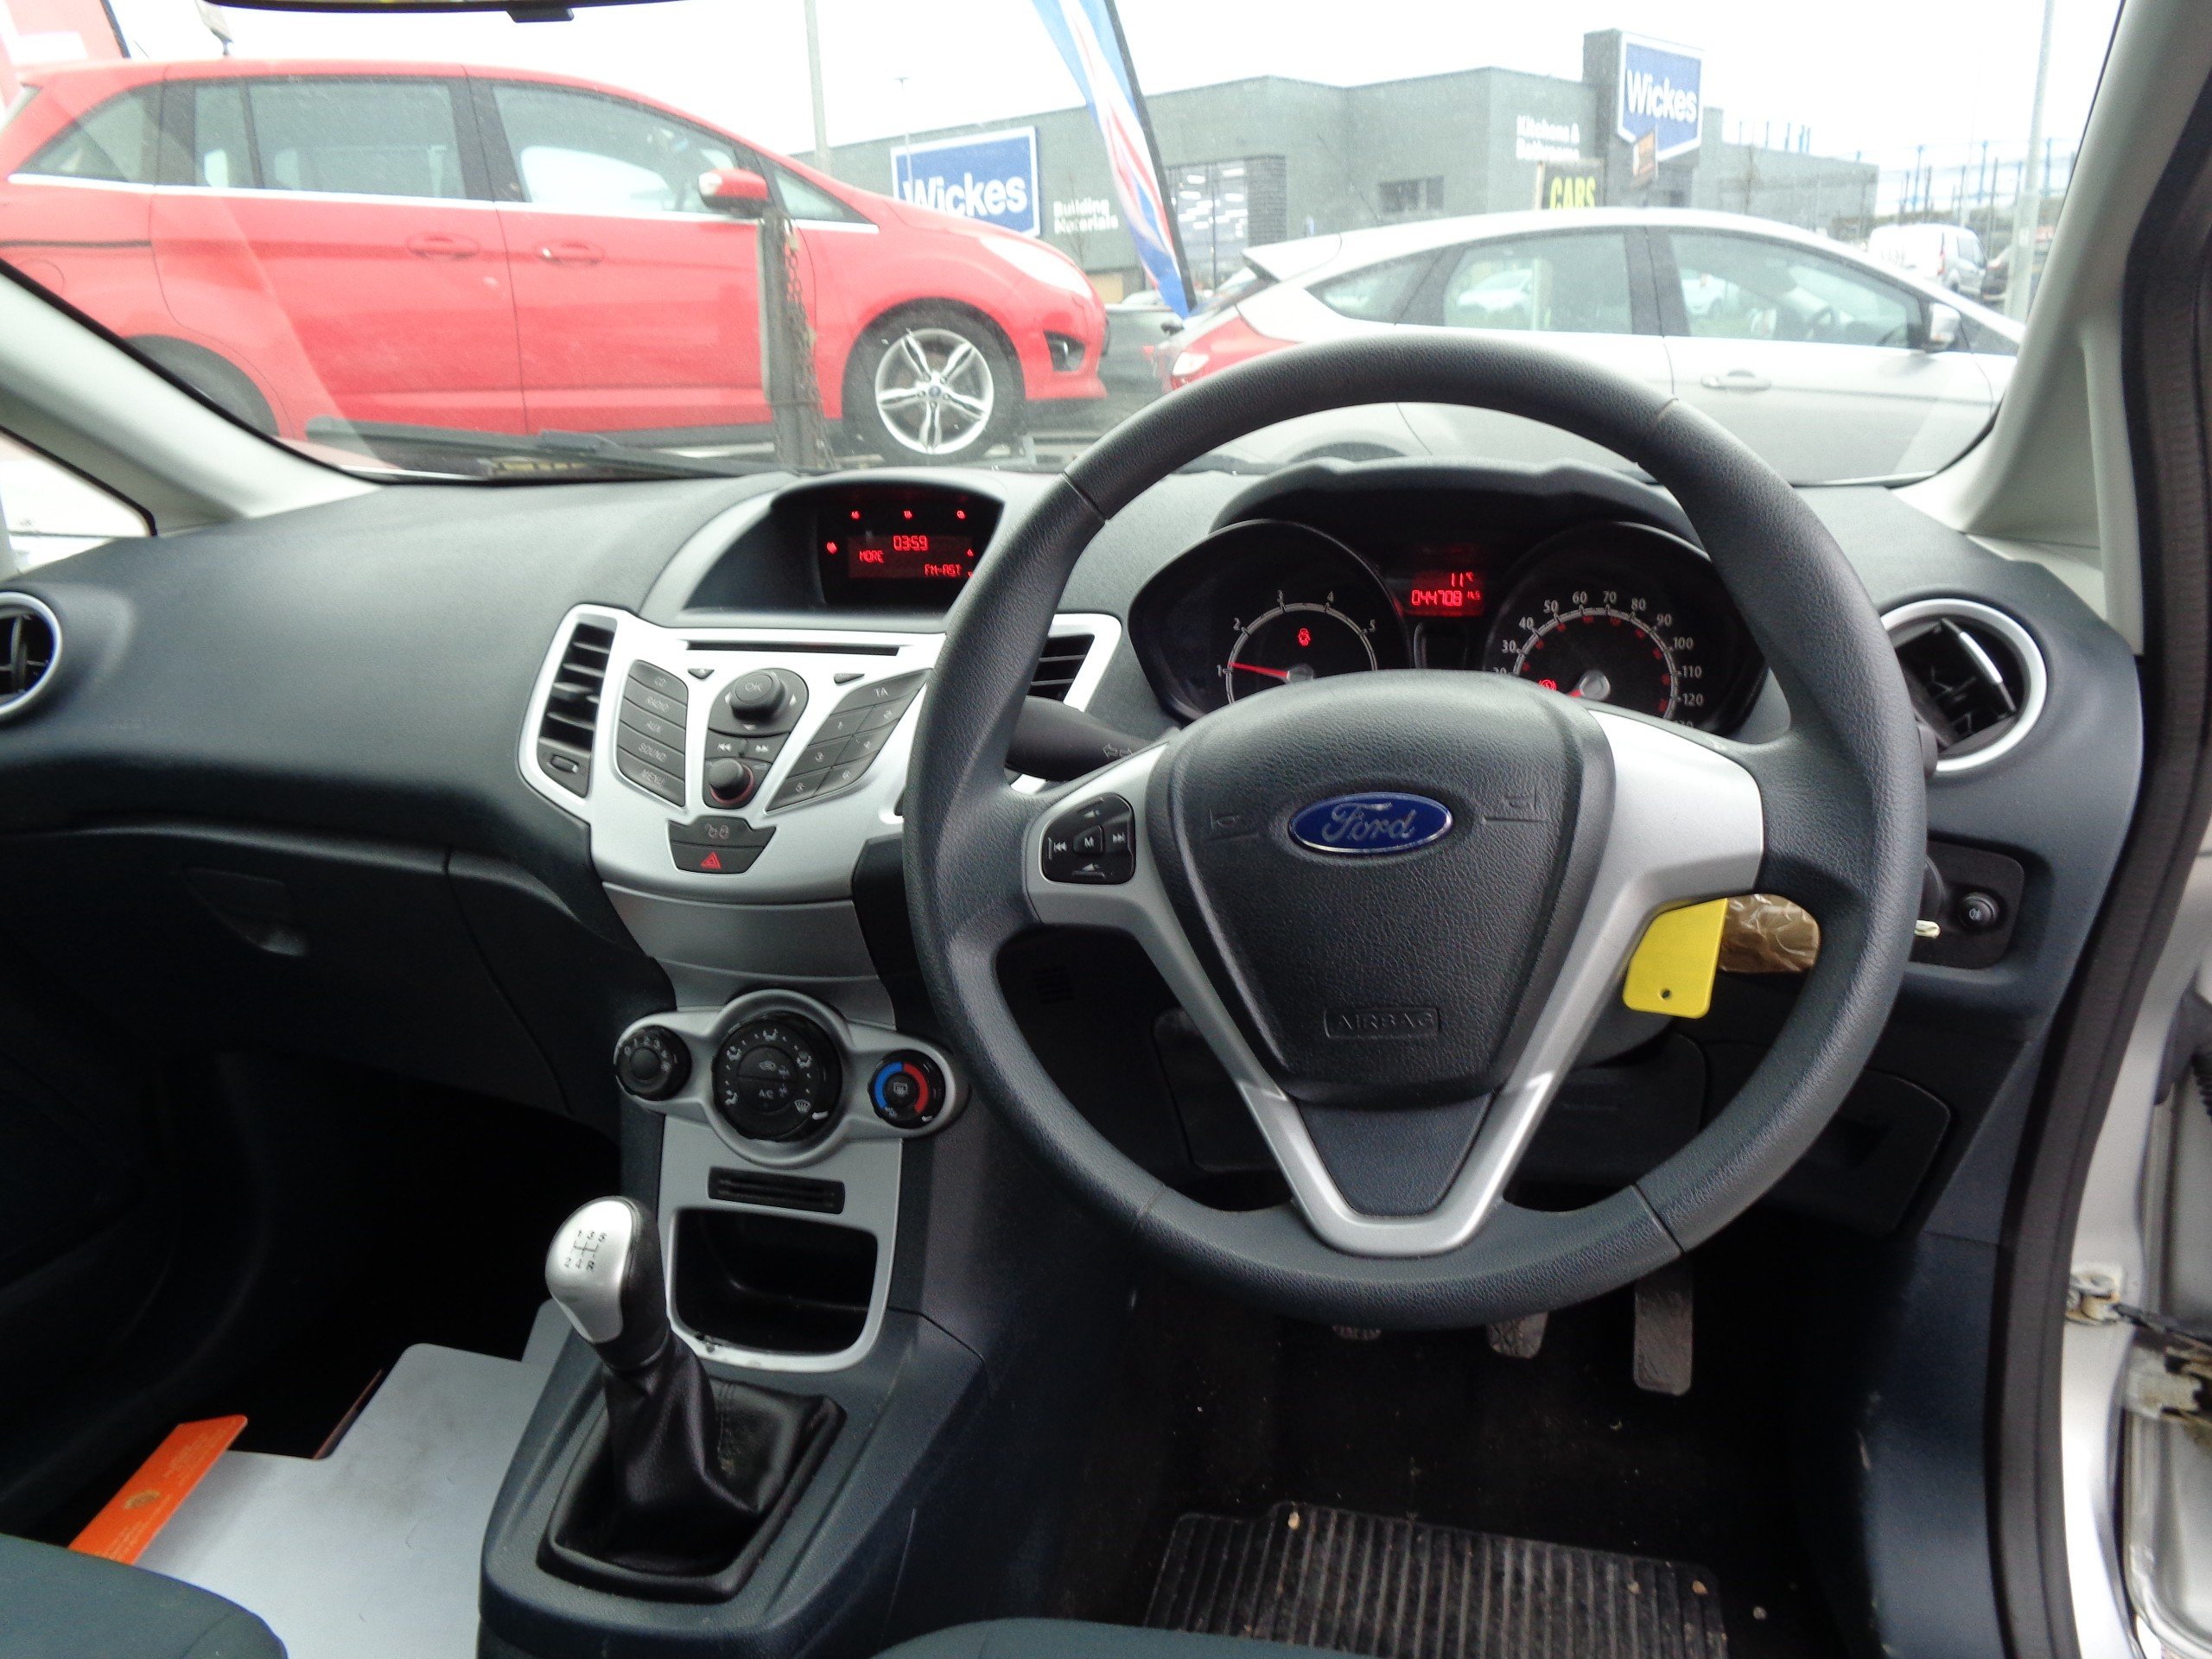 Used 2012 Ford Fiesta Edge 3 Door For Sale In Eastbourne East Sussex